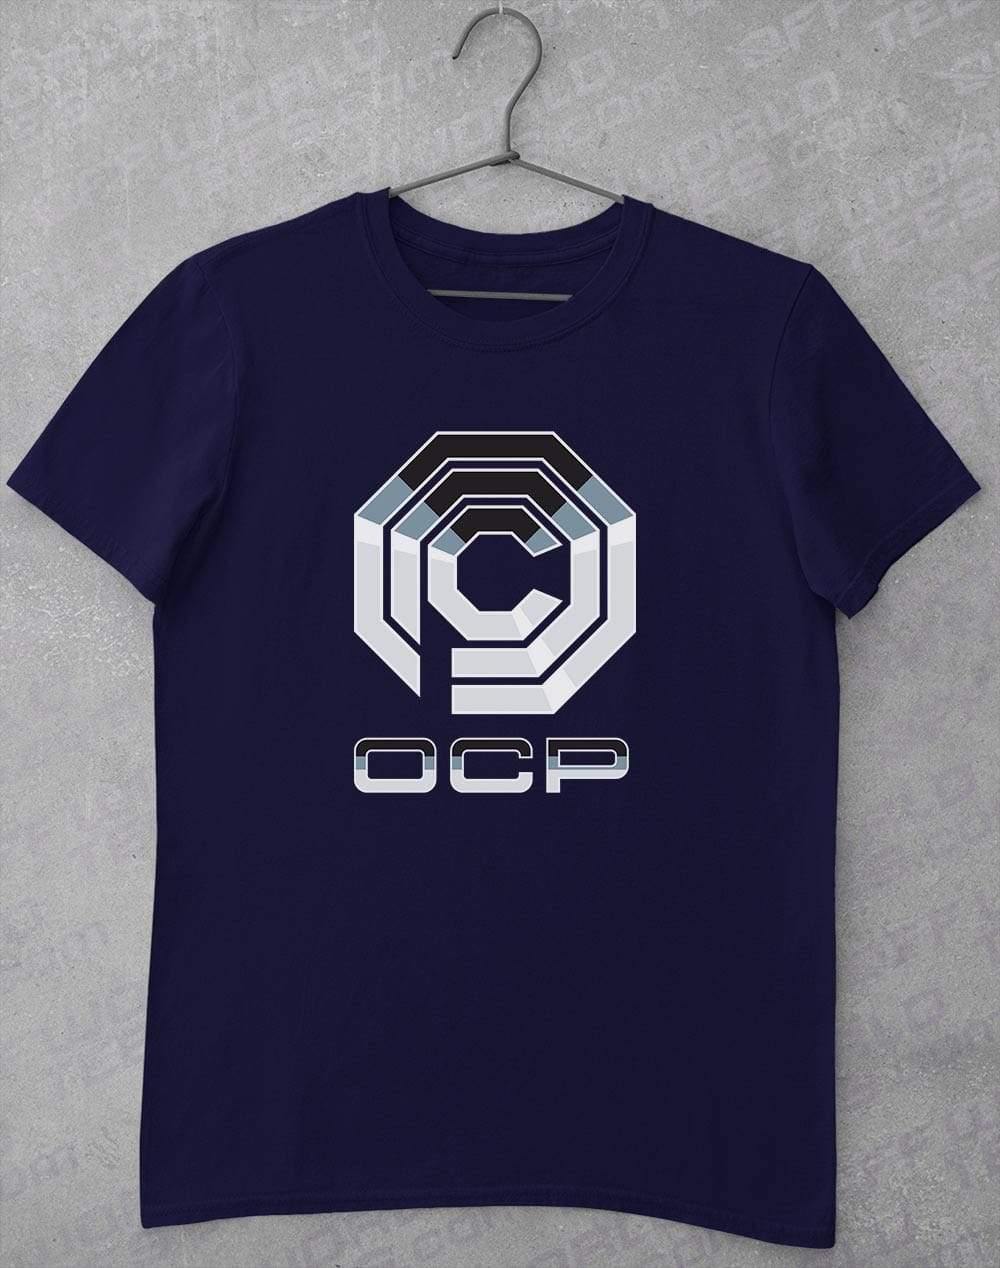 Omni Consumer Products T-Shirt S / Navy  - Off World Tees